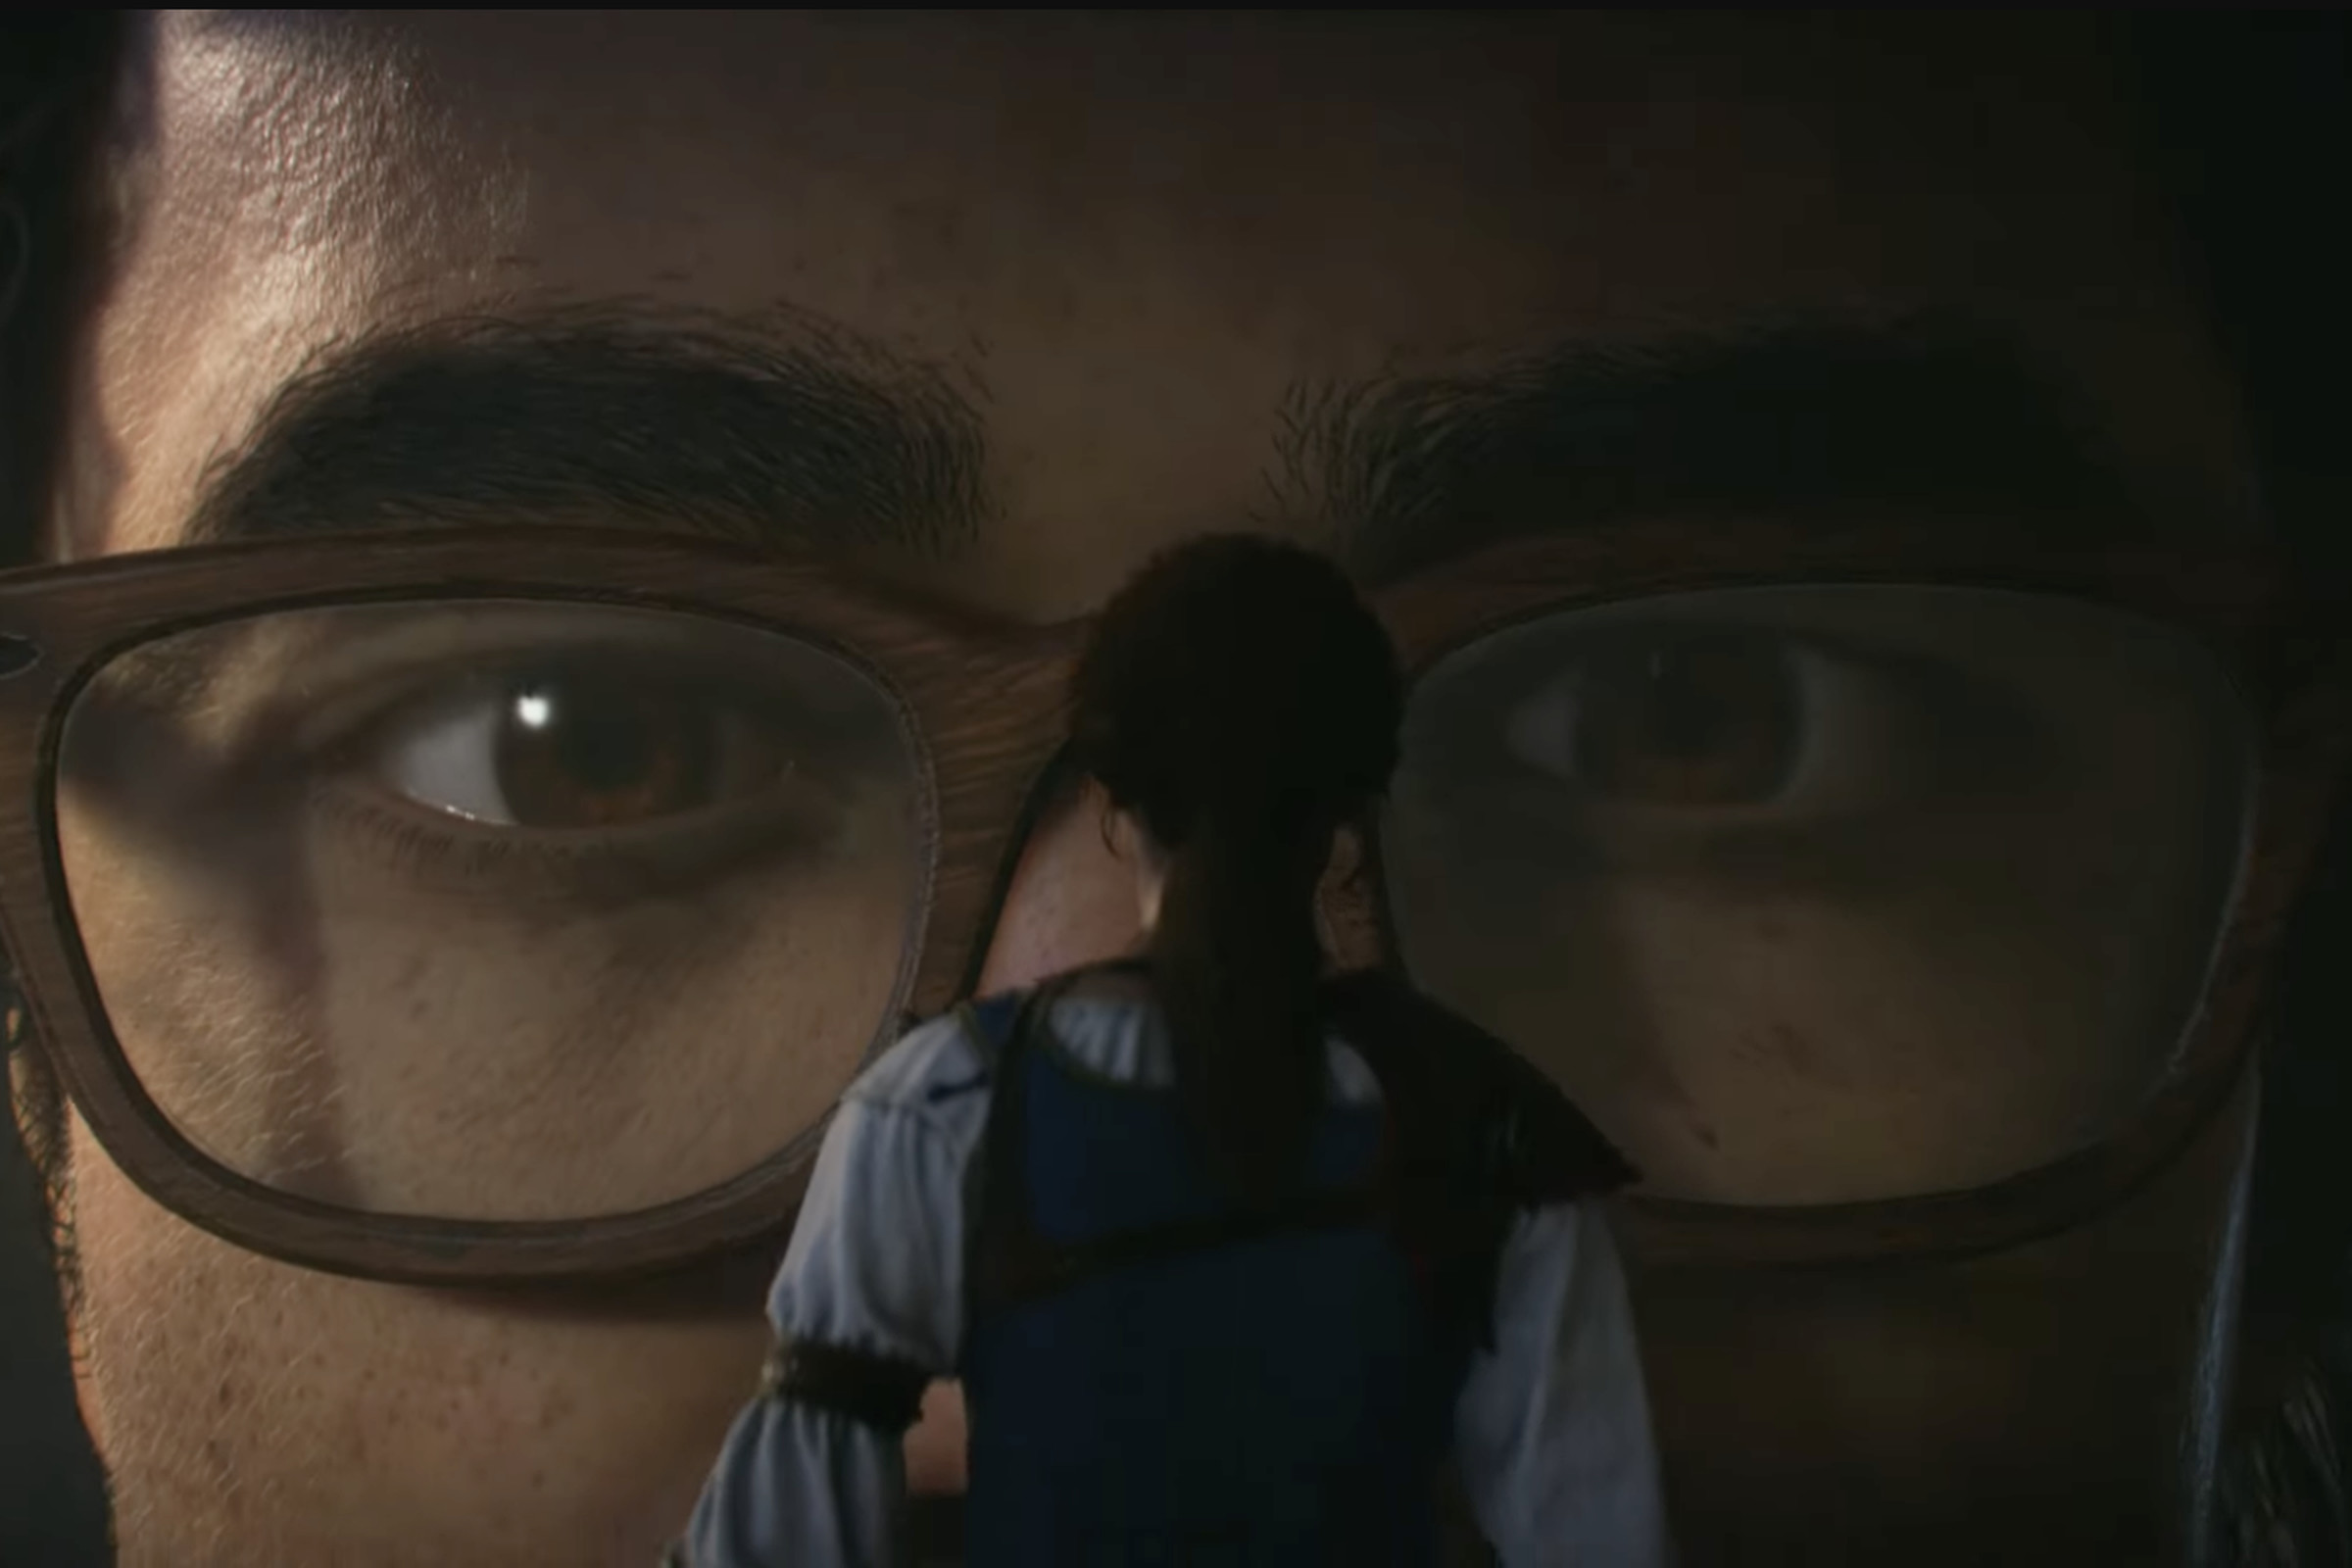 Screenshot from Fable trailer featuring a giant with brown skin and glasses standing eye-to-eye with a human female adventurere